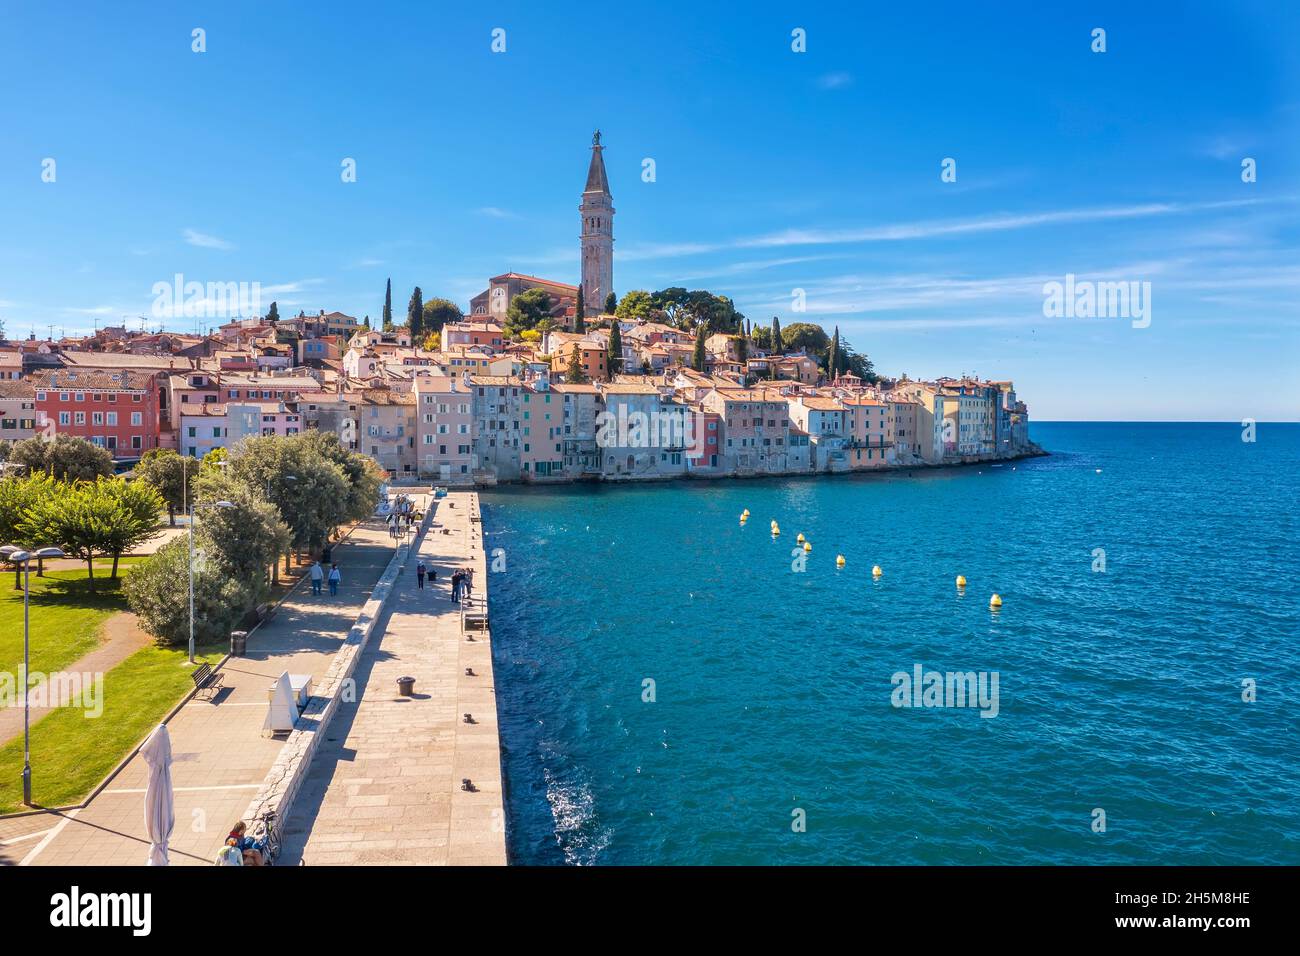 an amazing wiew of Rovinj with bell tower. On the top of tower is statue St. Euphemia protector of  Rovinj, Istria, Croatia Stock Photo